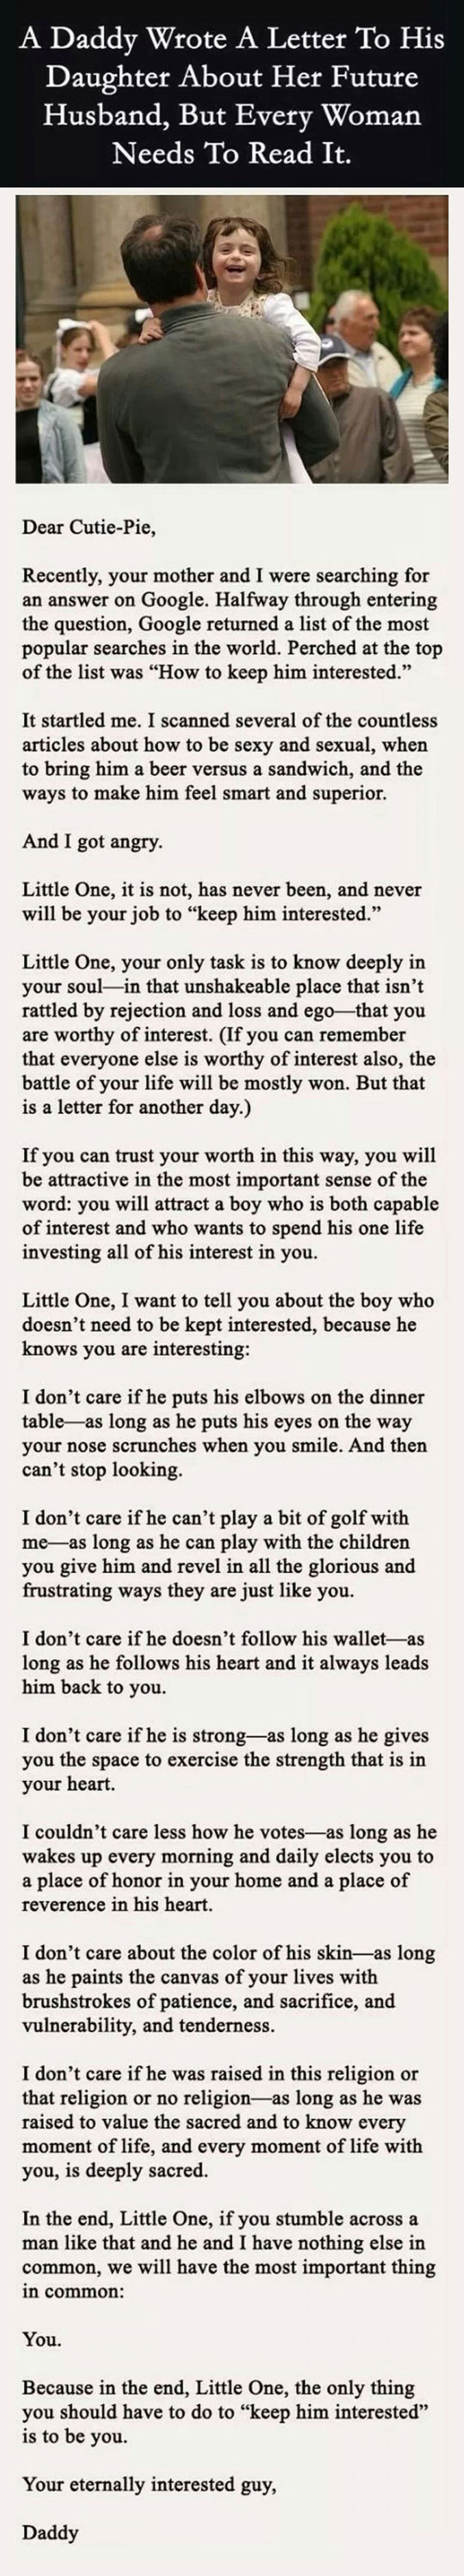 Letter From A Father To His Daughter